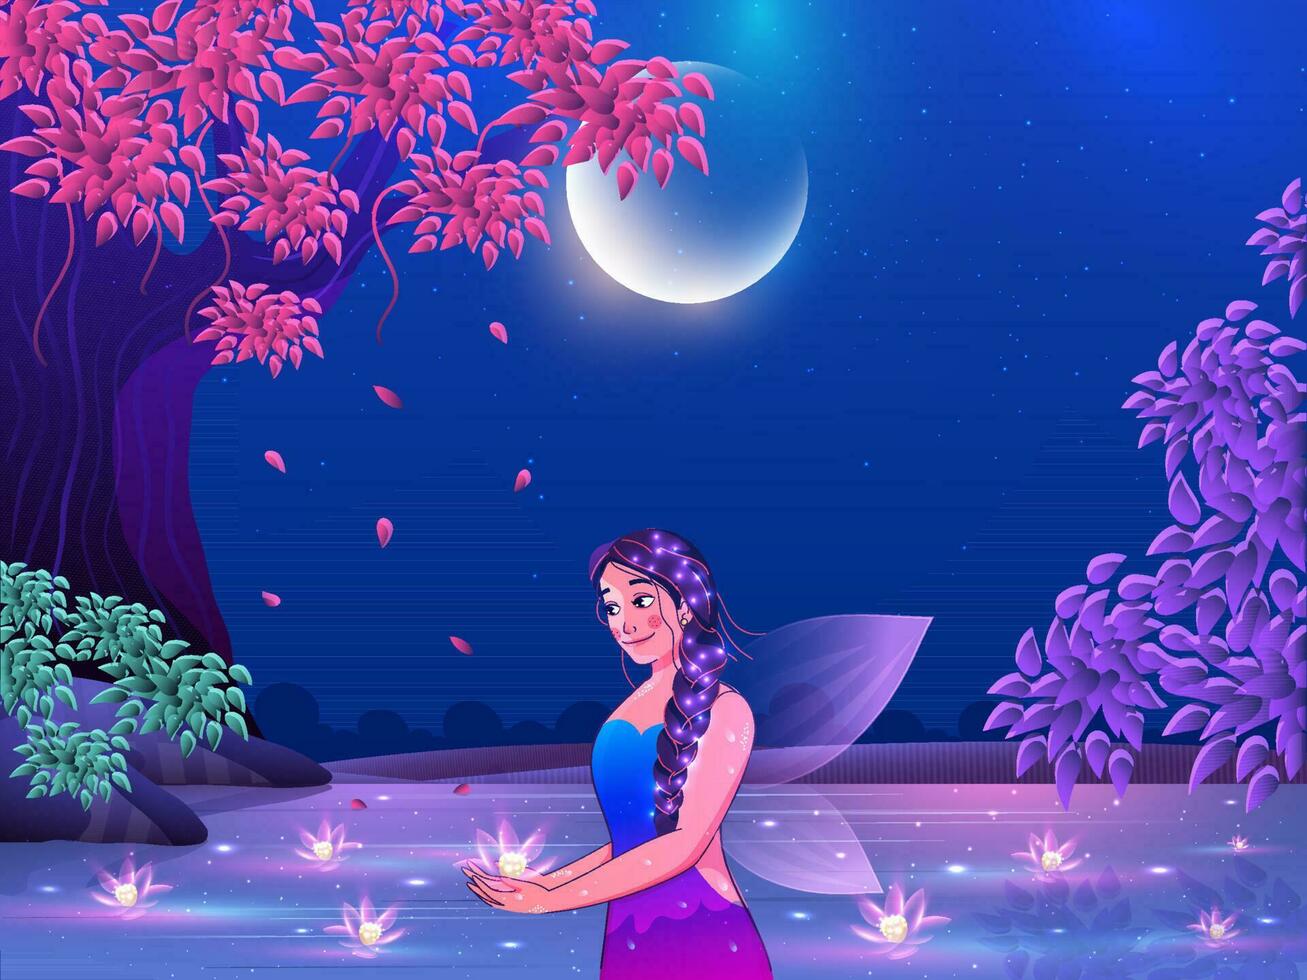 Magical Forest Moon Background With Fairy Girl Holding Lotus Flower On Water Surface. vector